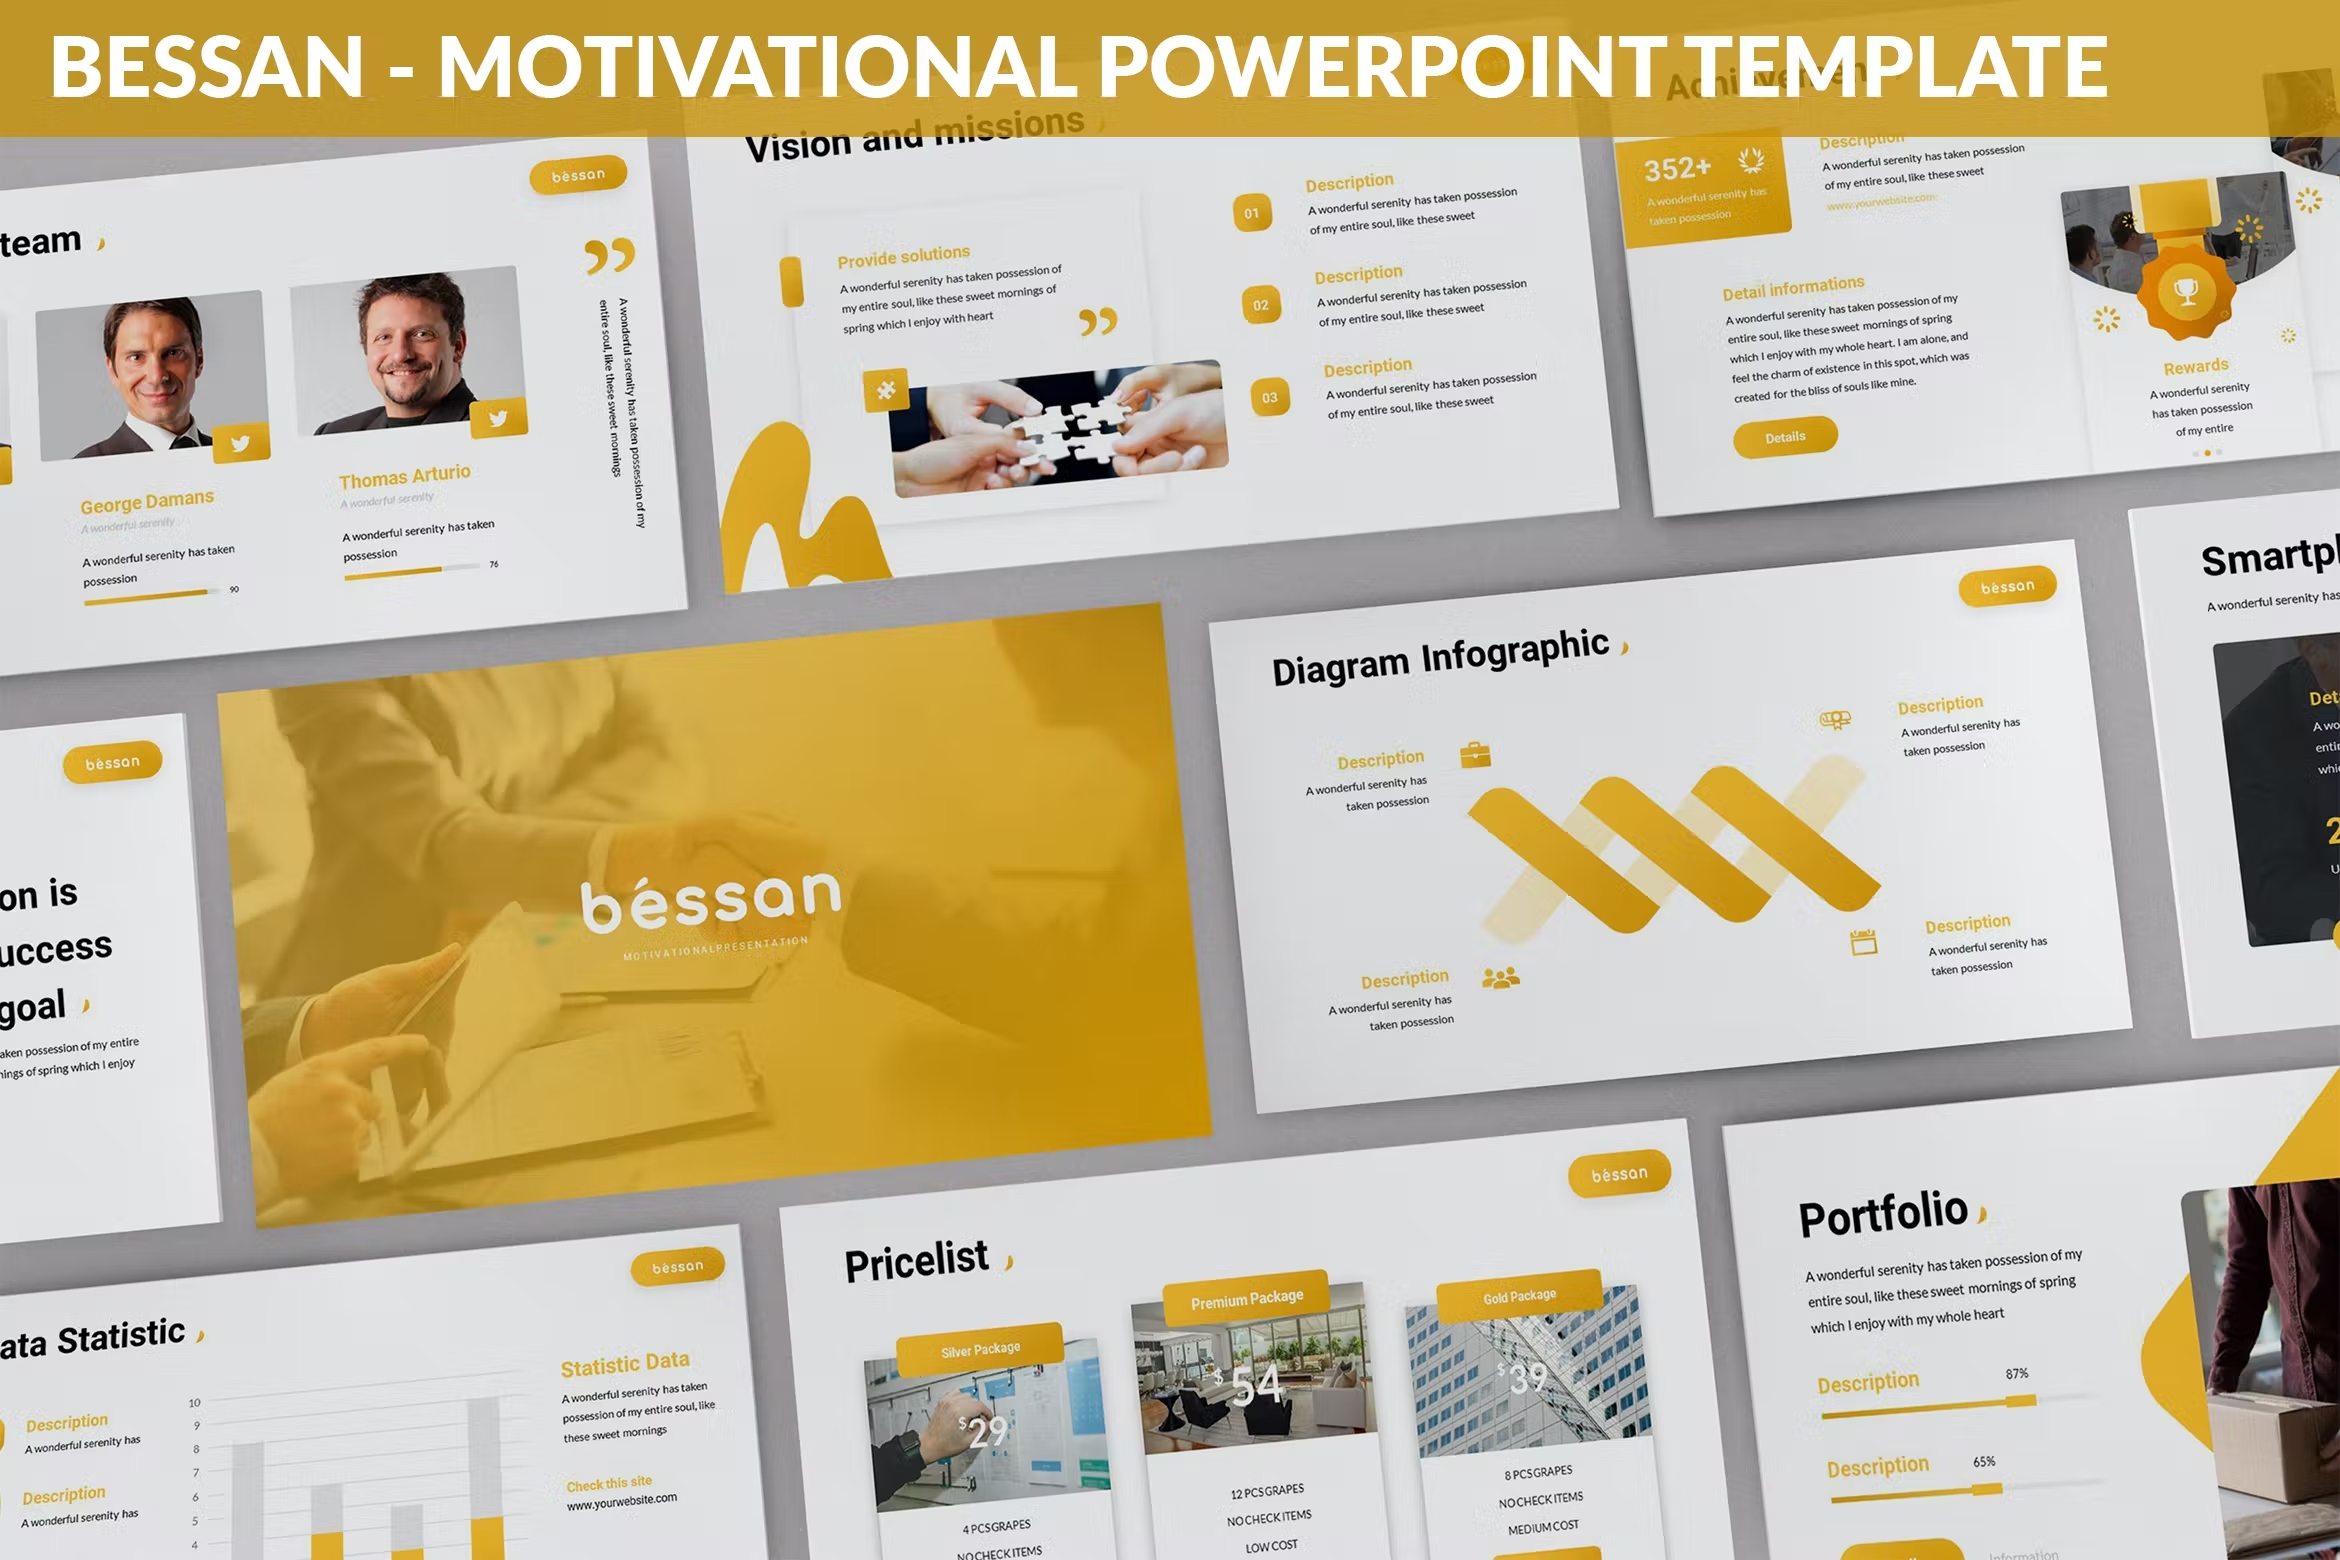 Cool yellow template for the presentation with the simple and understandable design.